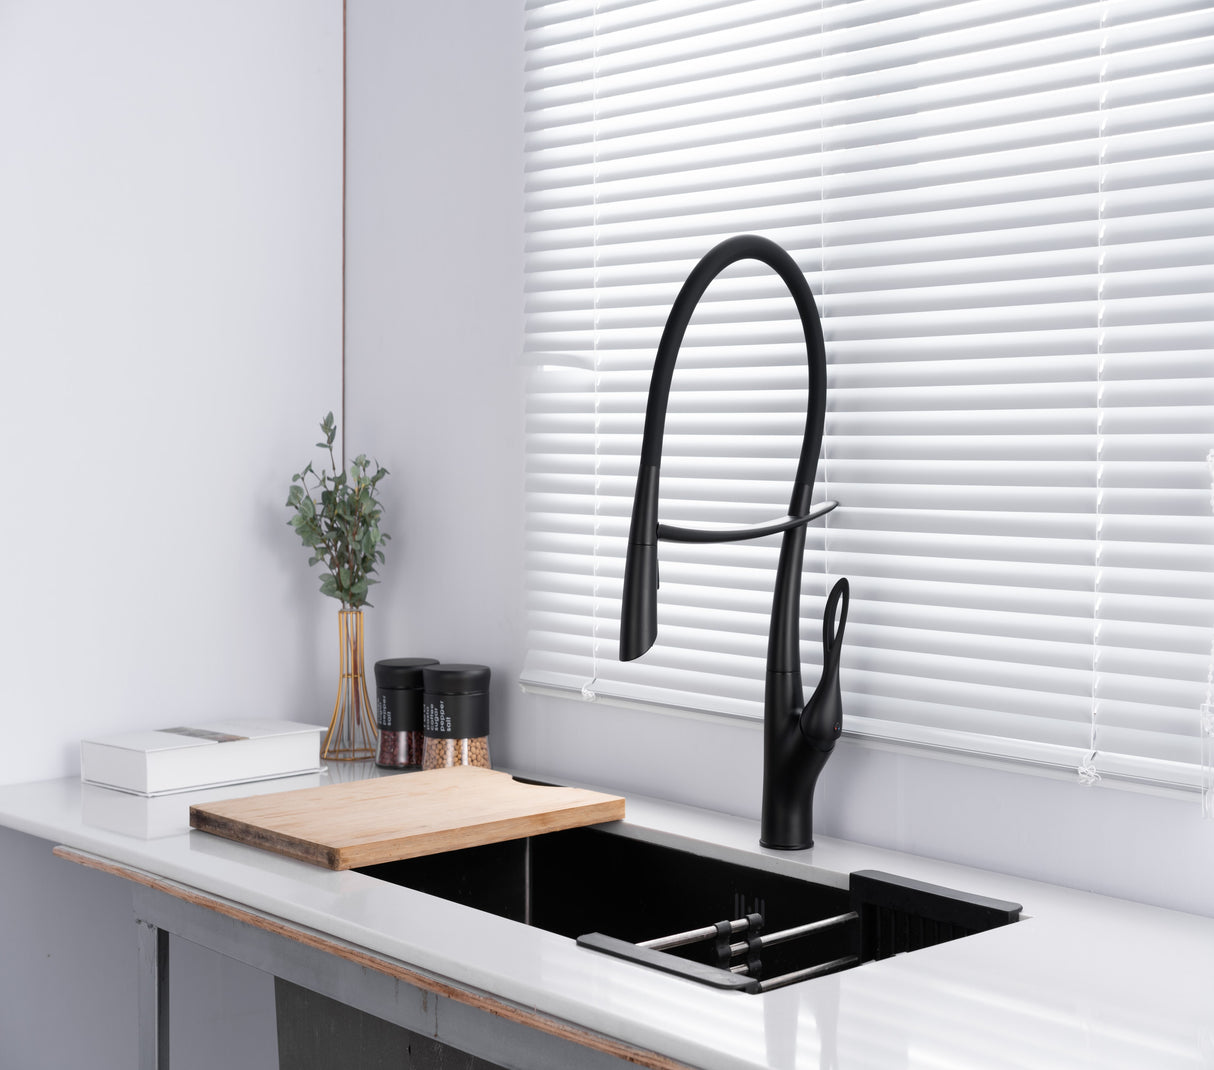 CANOPY|PULL DOWN KITCHEN FAUCET WITH SENSOR